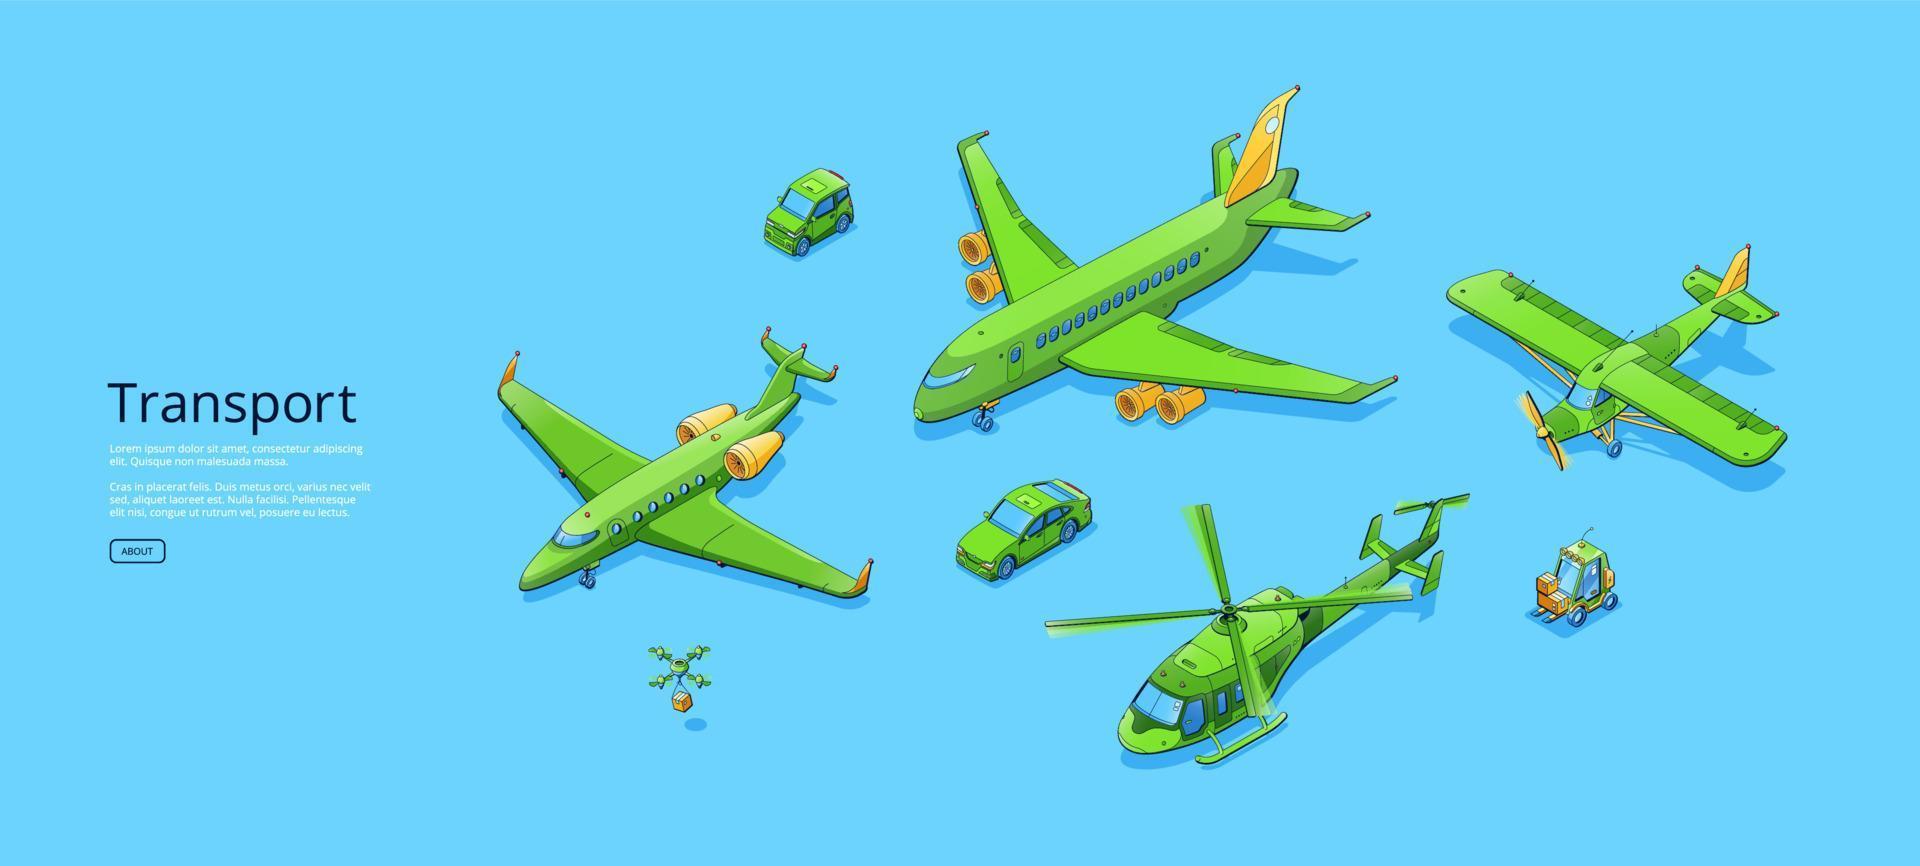 Transport poster with airplanes, helicopter, cars vector